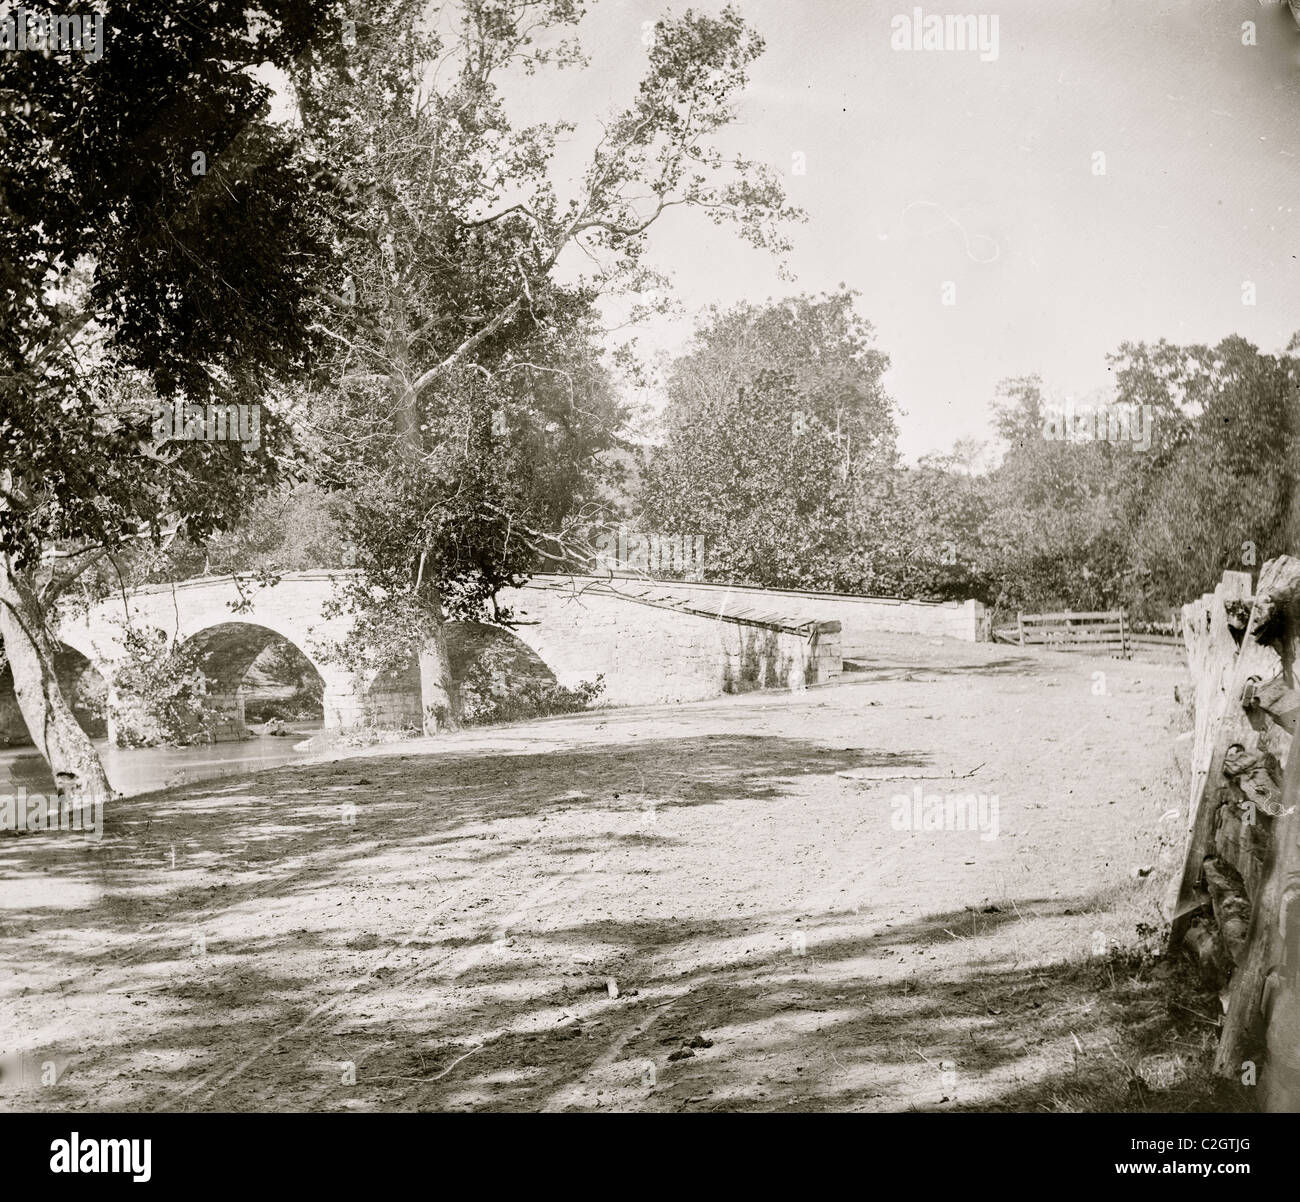 North Anna River, Virginia. Interior view of Confederate redoubt commanding Chesterfield bridge. Captured by 2nd Corps under Gen. Hancock, May 23, 1865 Stock Photo